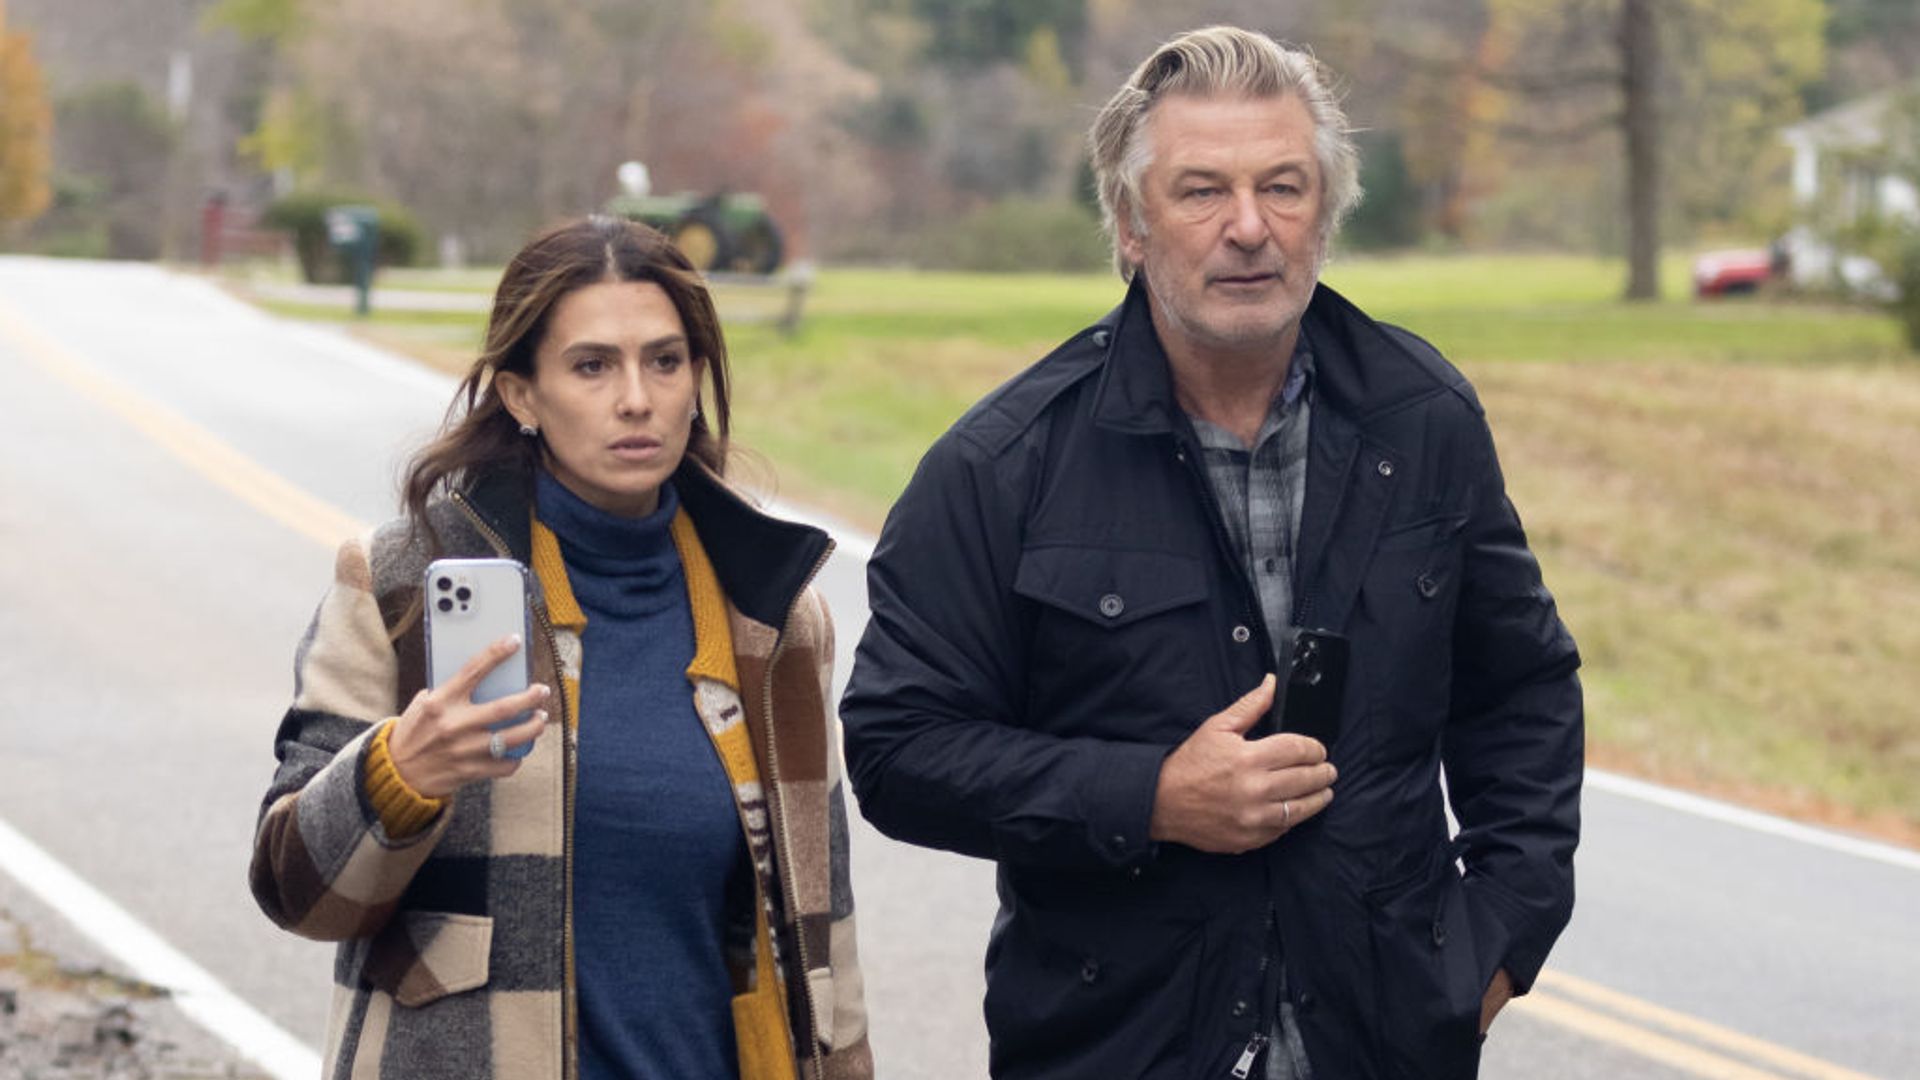 Hilaria Baldwin and Alec Baldwin on a walk in Manchester, Vermont